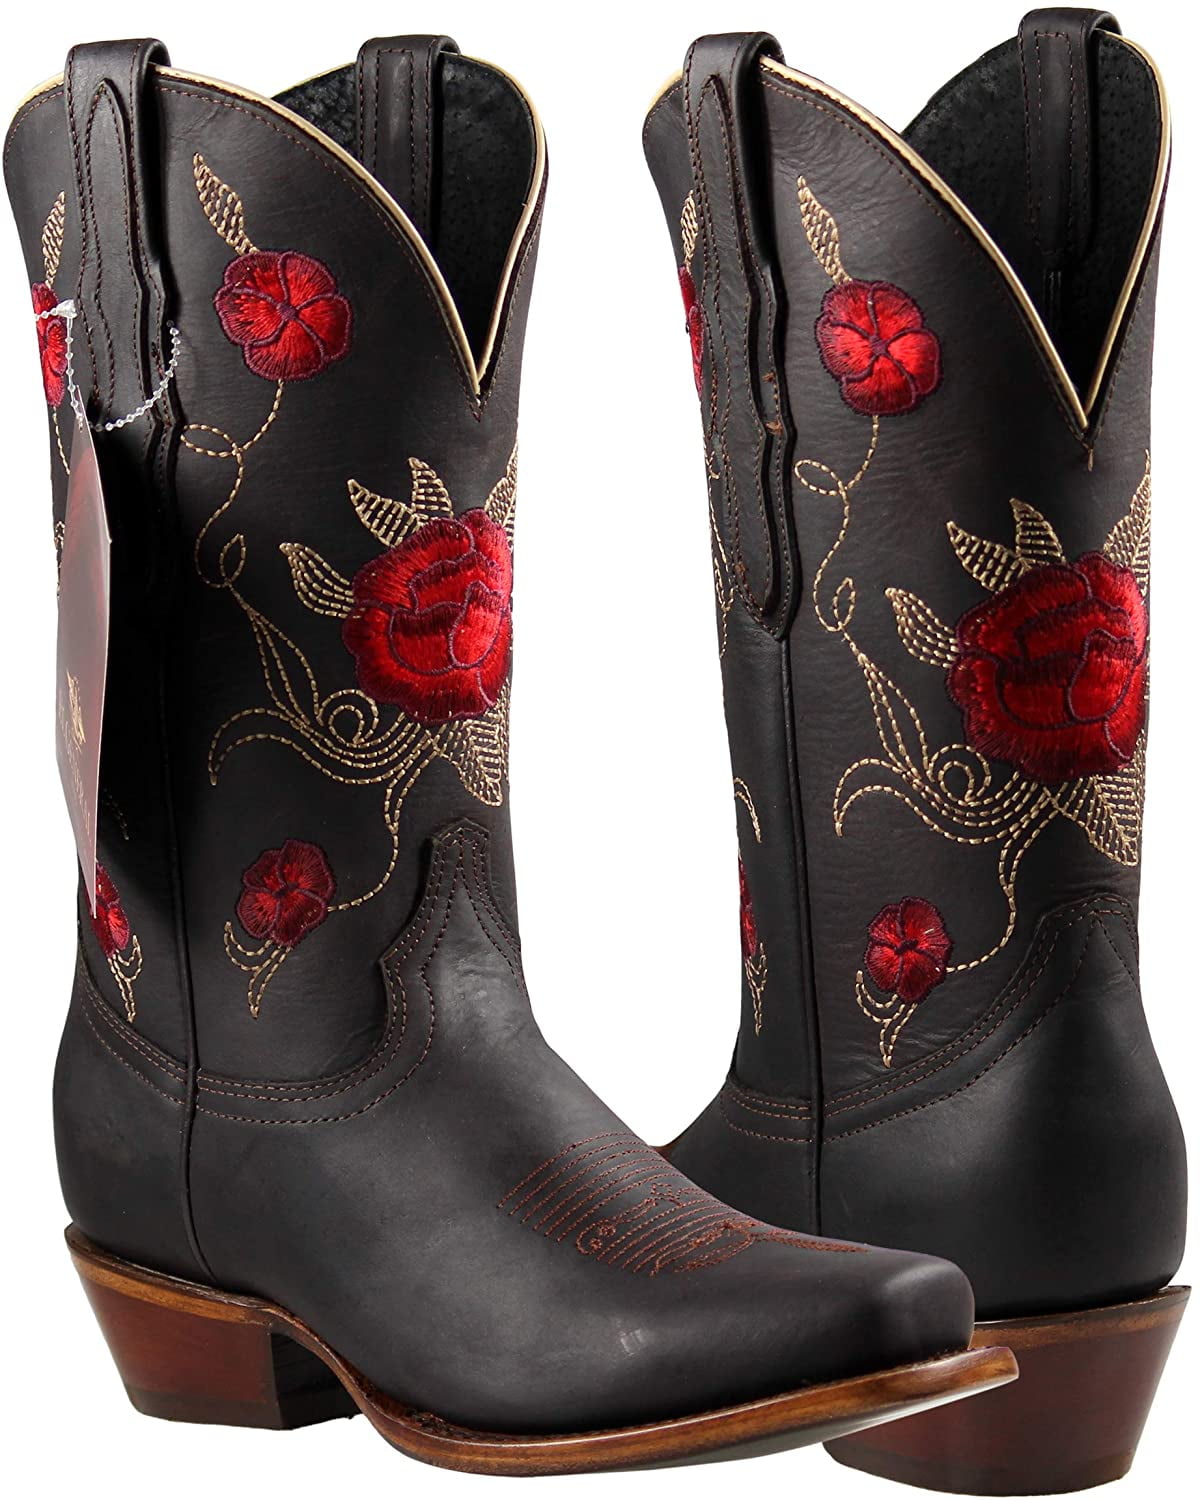 Women's New Leather Western Cowgirl Rodeo Biker Boots Square Black Red 